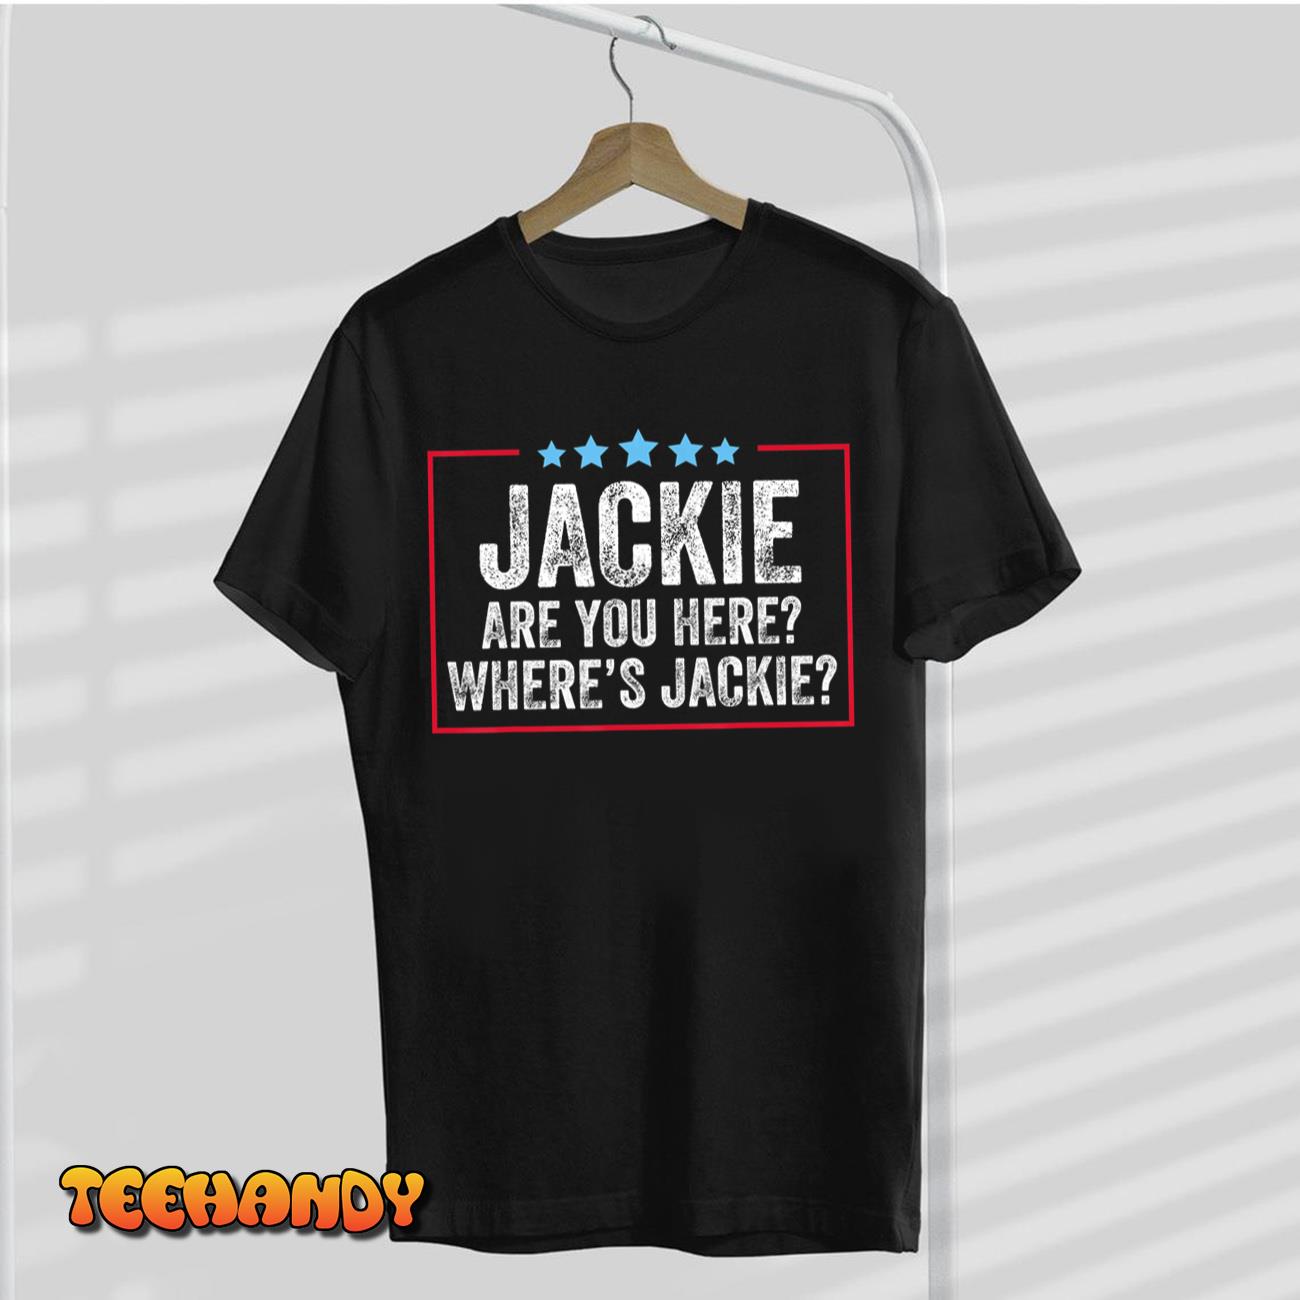 Jackie Are You Here Where’s Jackie Funny Apparel Vintage T-Shirt